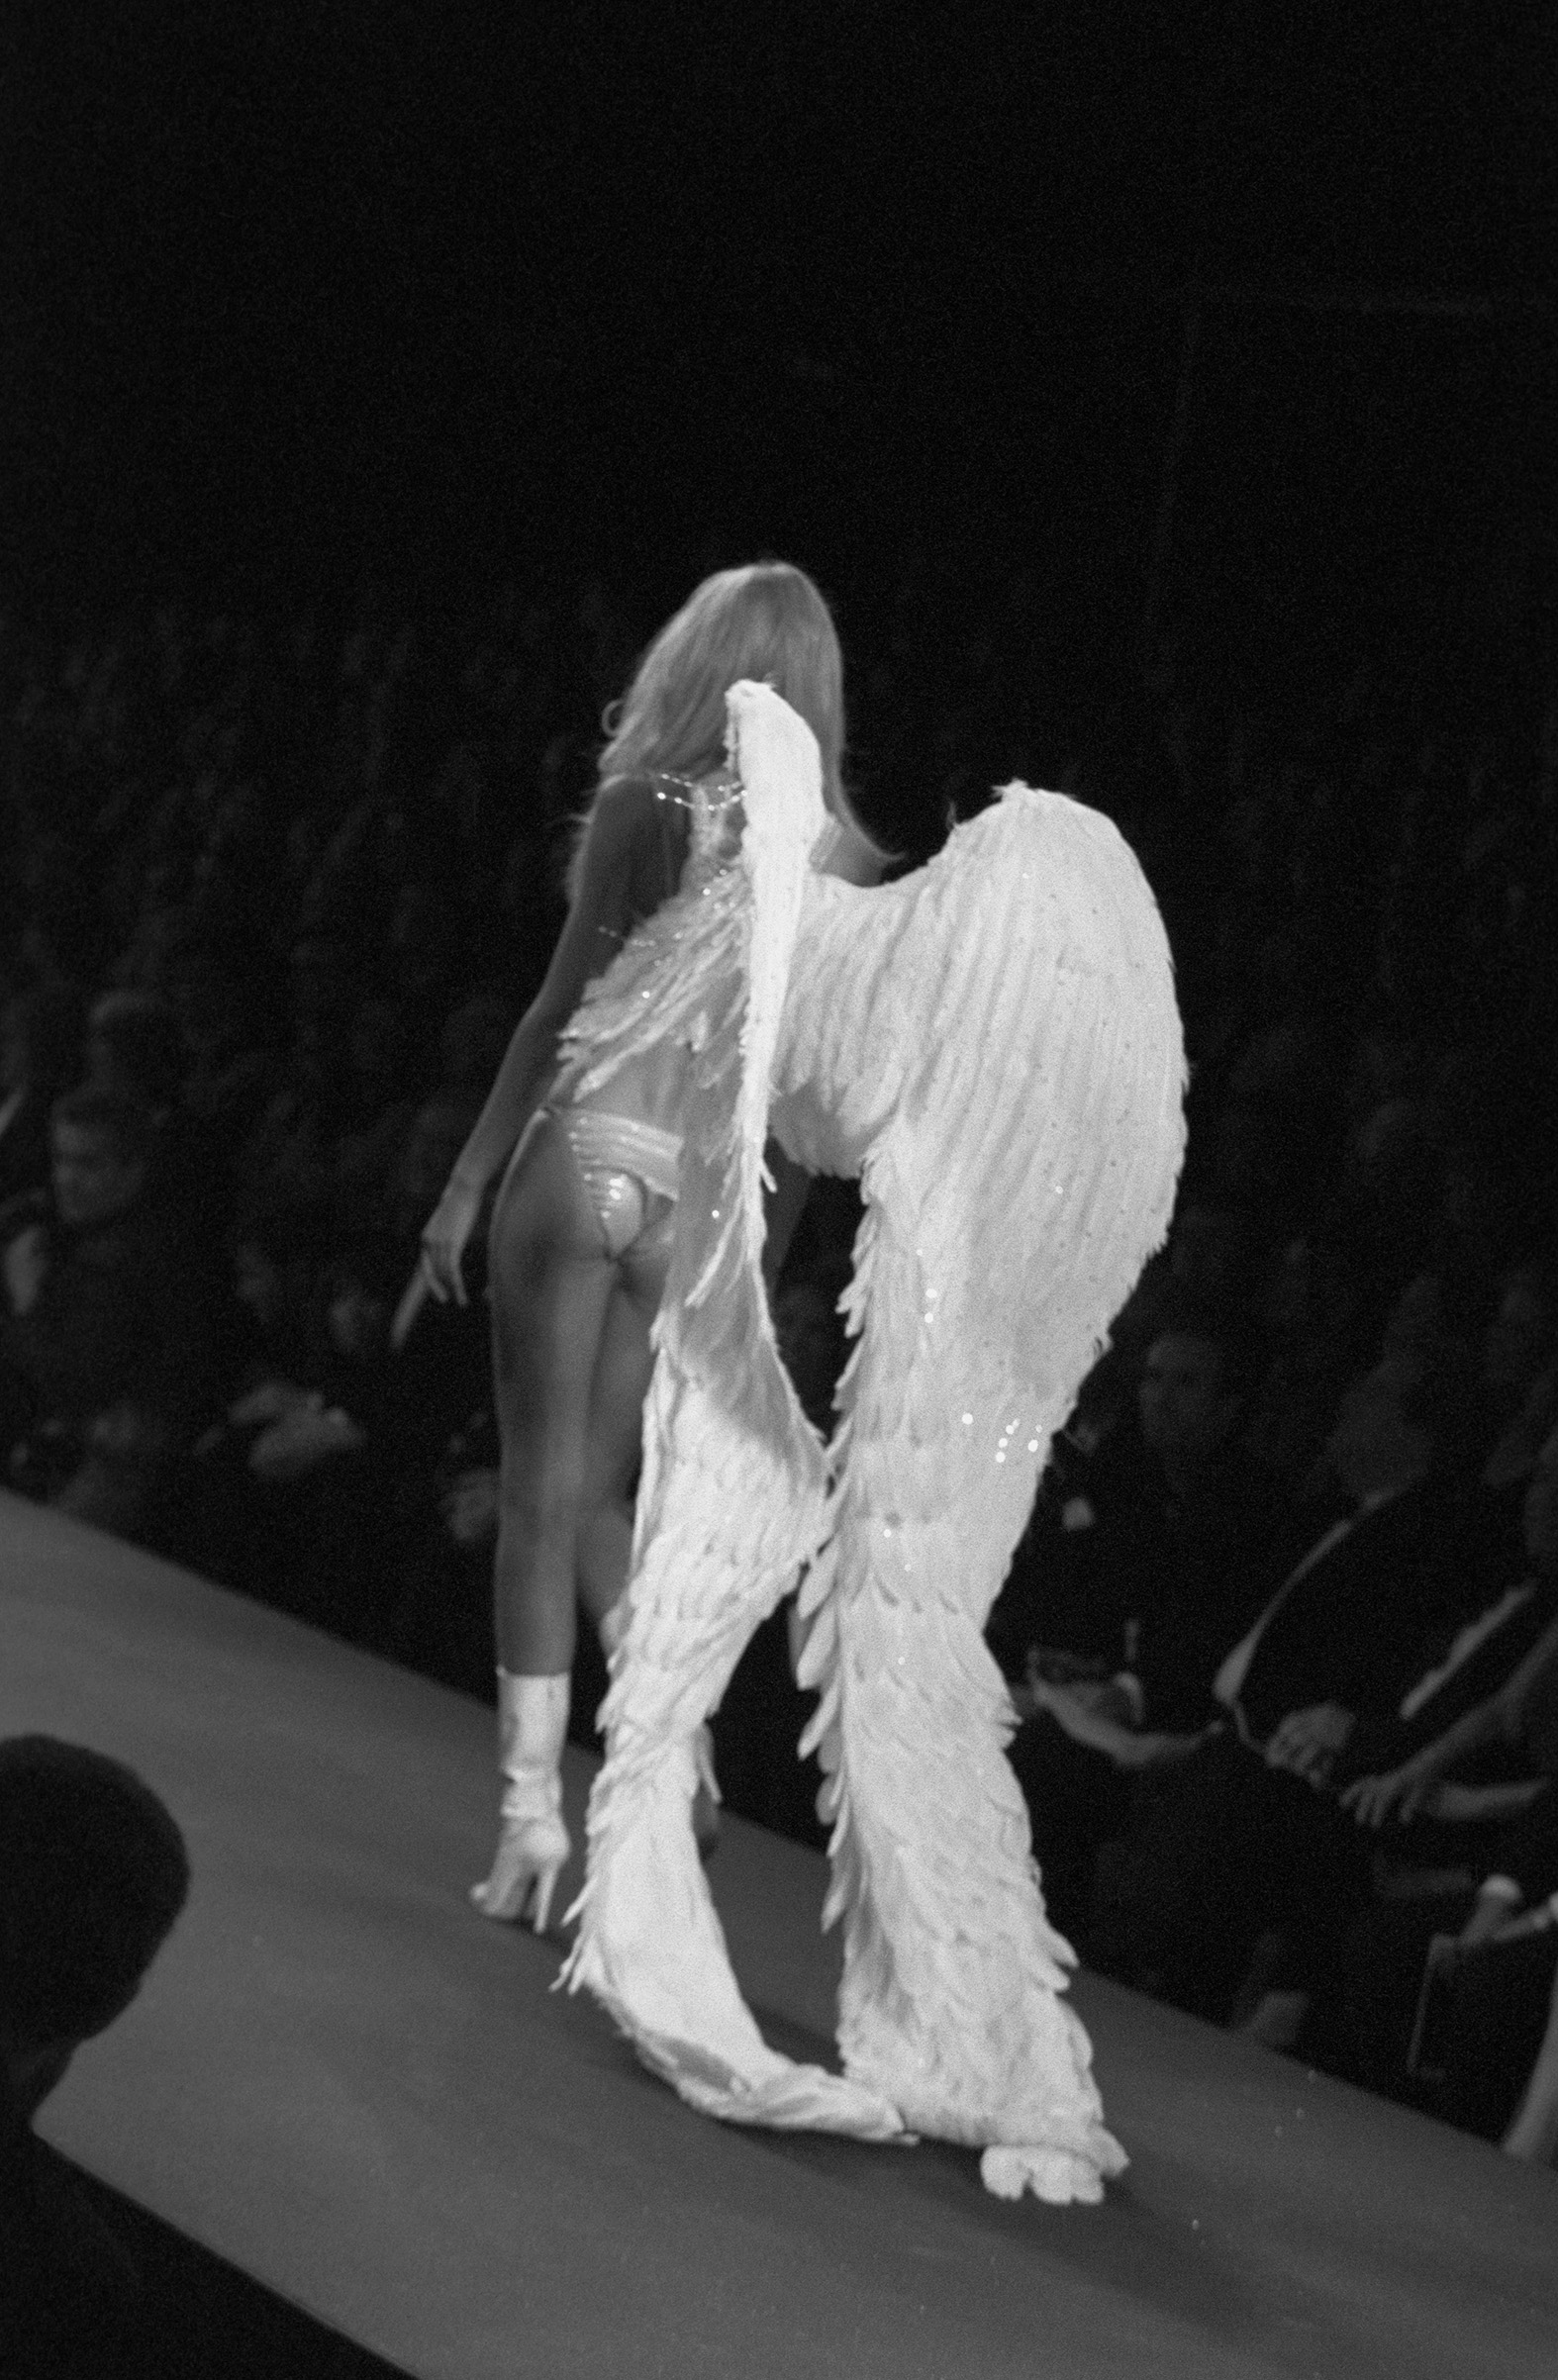 Supermodel and Victoria’s Secret Angel Heidi Klum walks the brand’s renowned fashion show in Cannes, France, in 2000